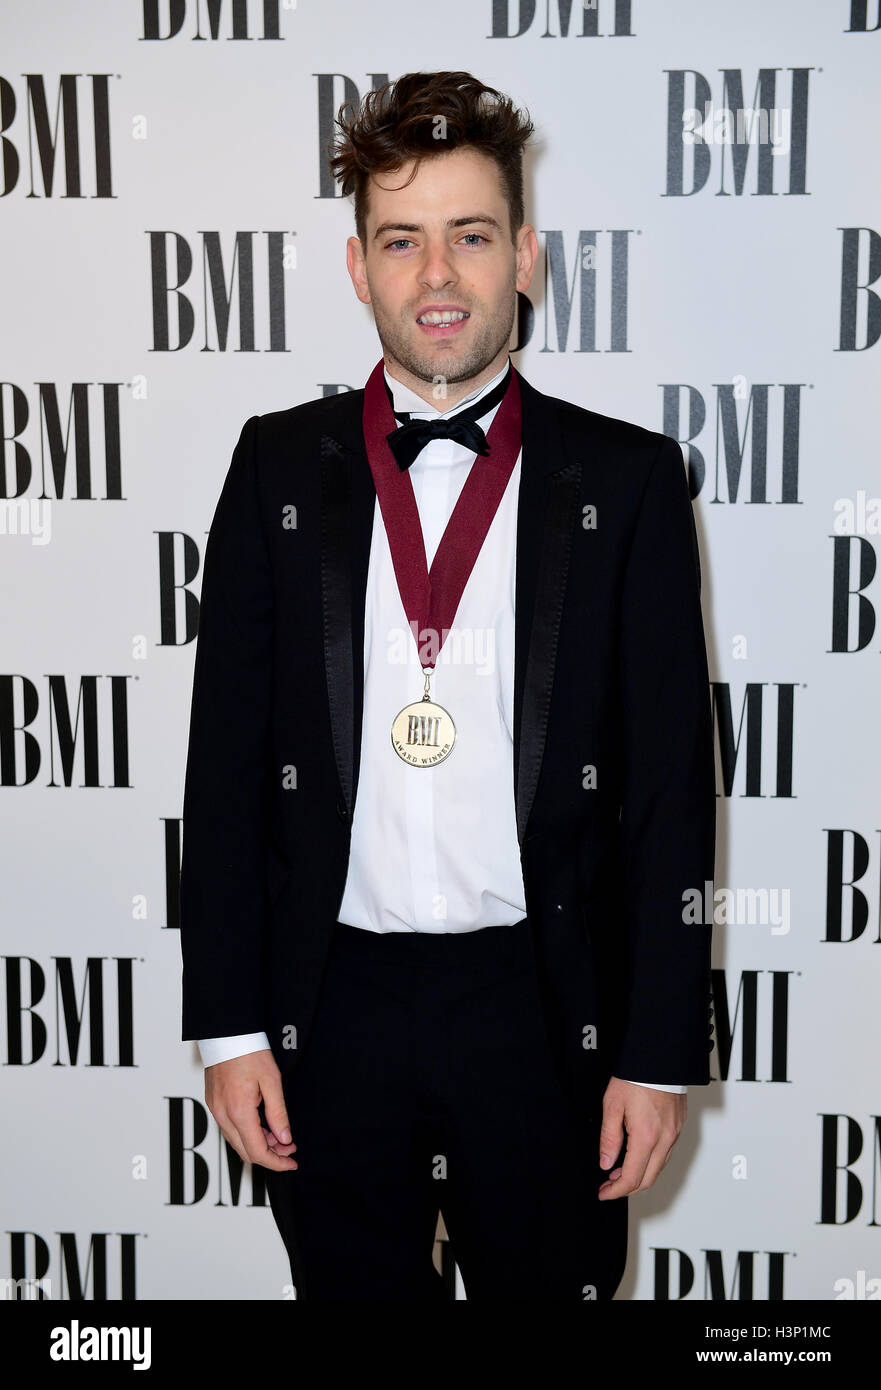 Liam O'Donnell attending the BMI London Awards at the Dorchester Hotel, London. PRESS ASSOCIATION Photo. Picture date: Monday 10th October, 2016. Photo credit should read: Ian West/PA Wire. Stock Photo